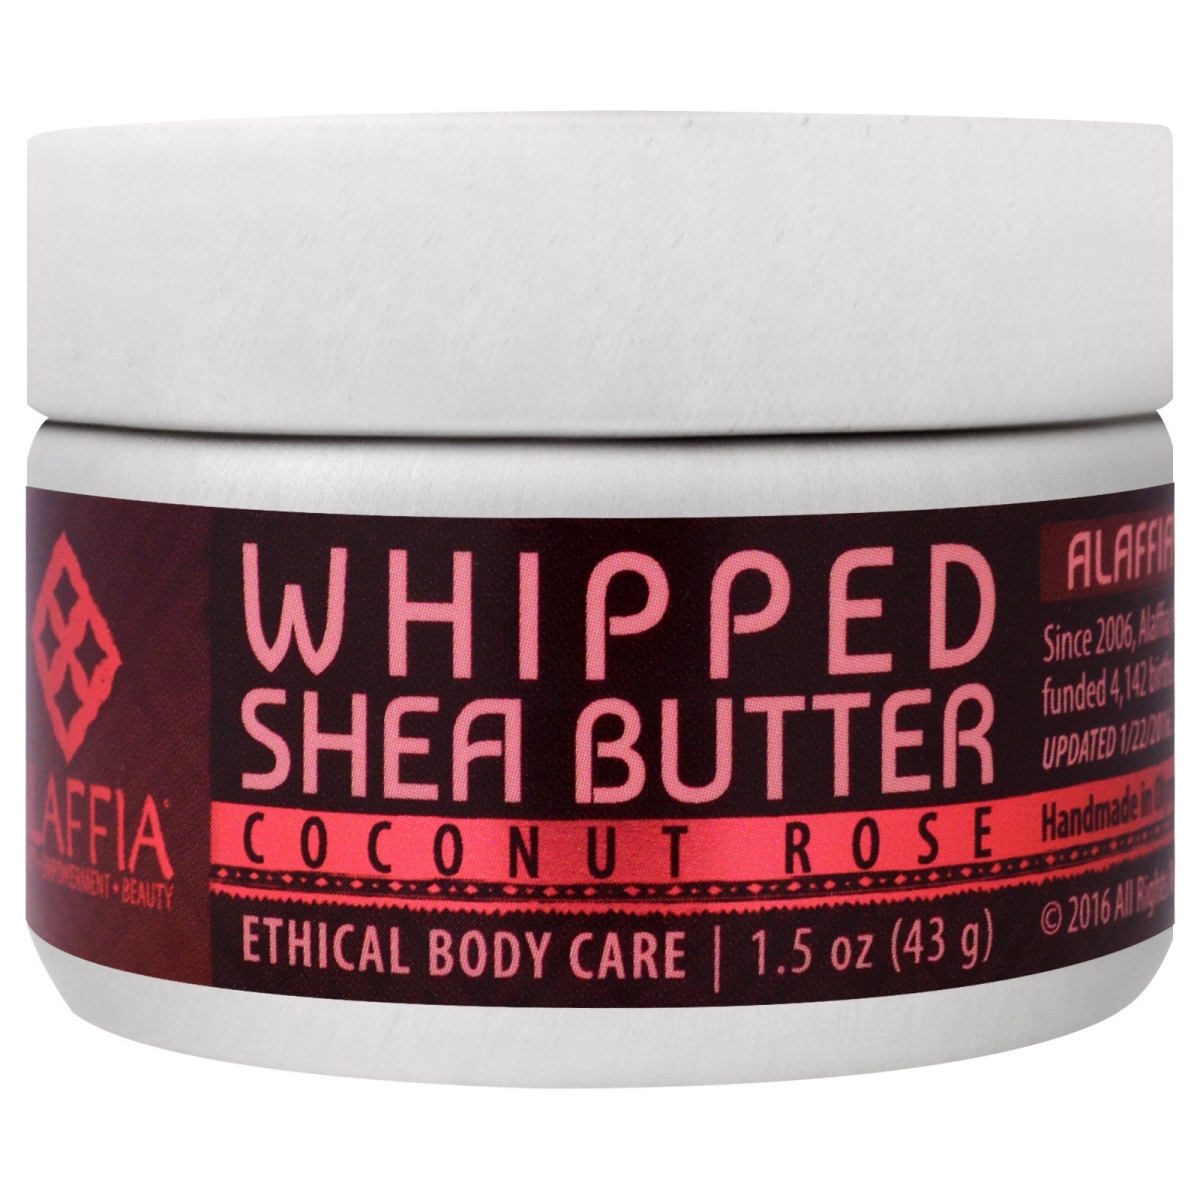 Picture of Alaffia 237690 1.5 oz Whipped Shea Butter Coconut Rose Cream